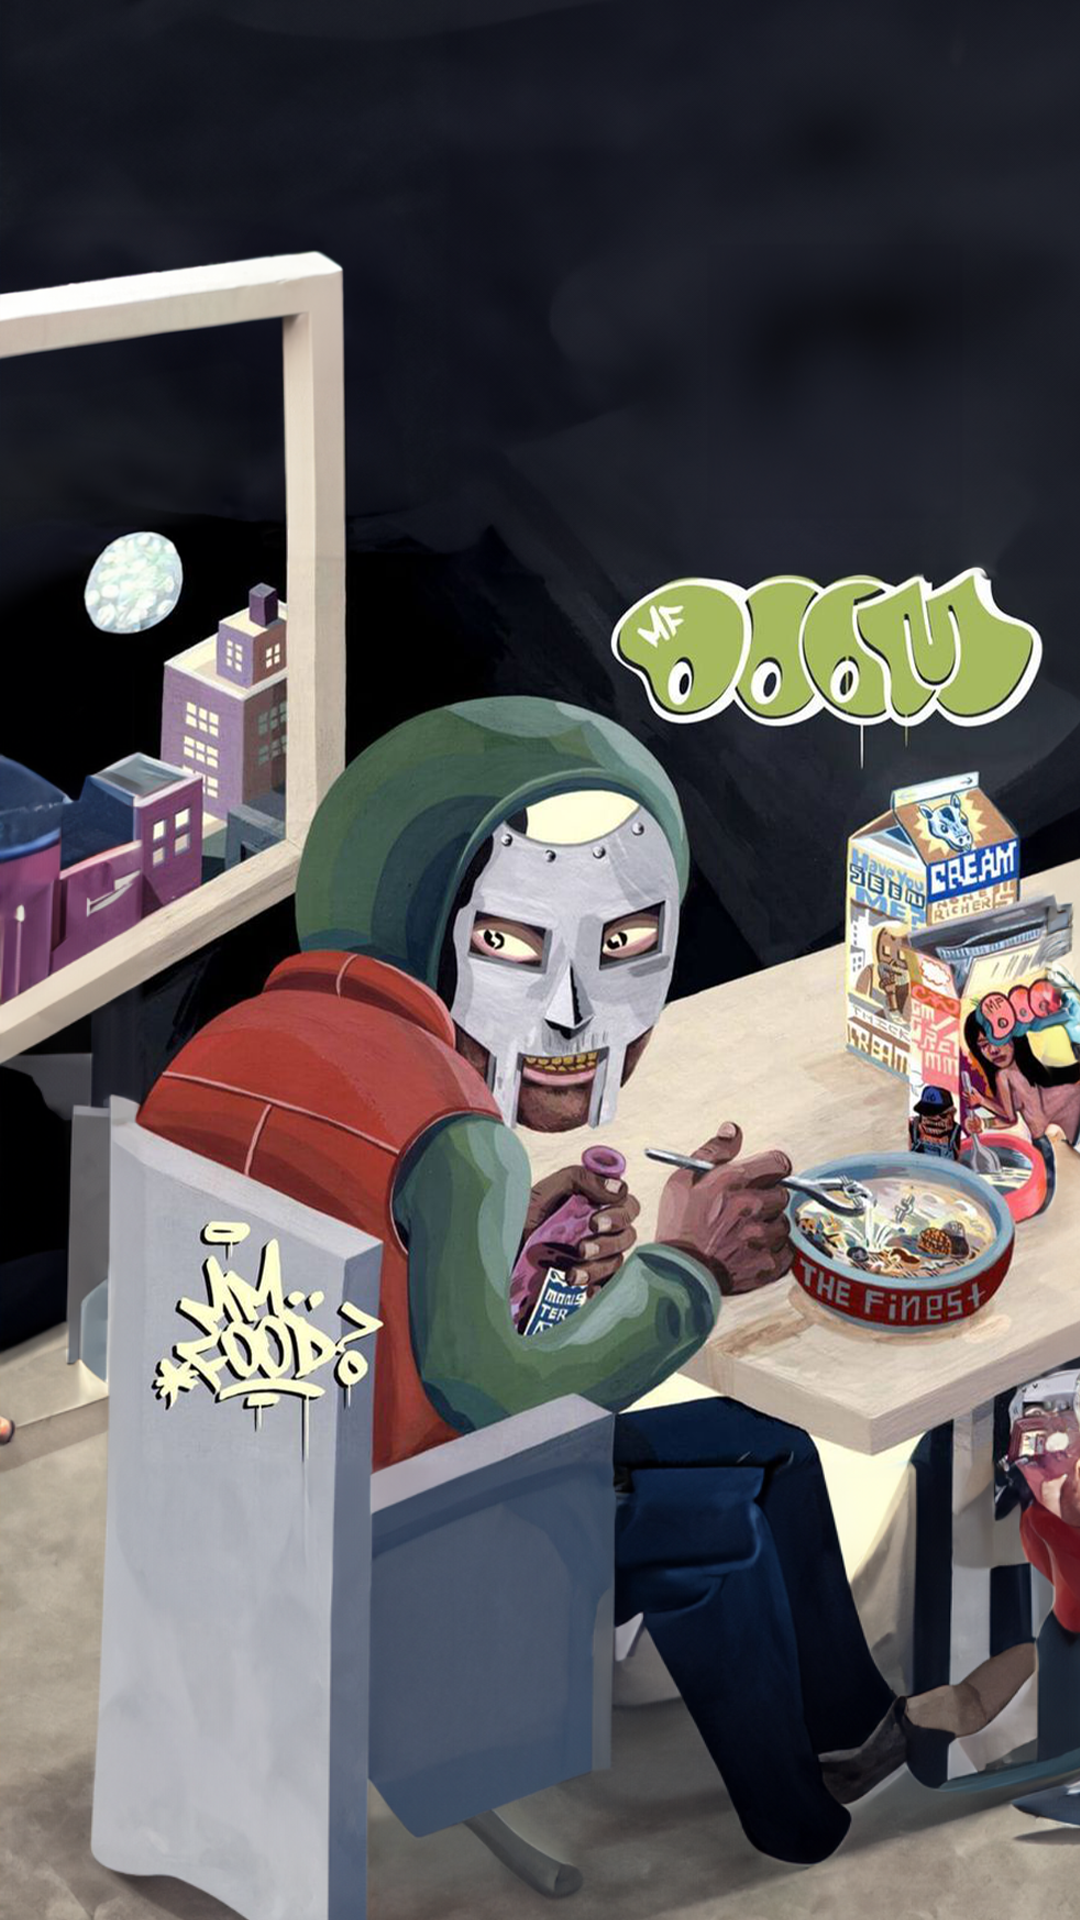 Mm..Food by MF DOOM album cover expanded